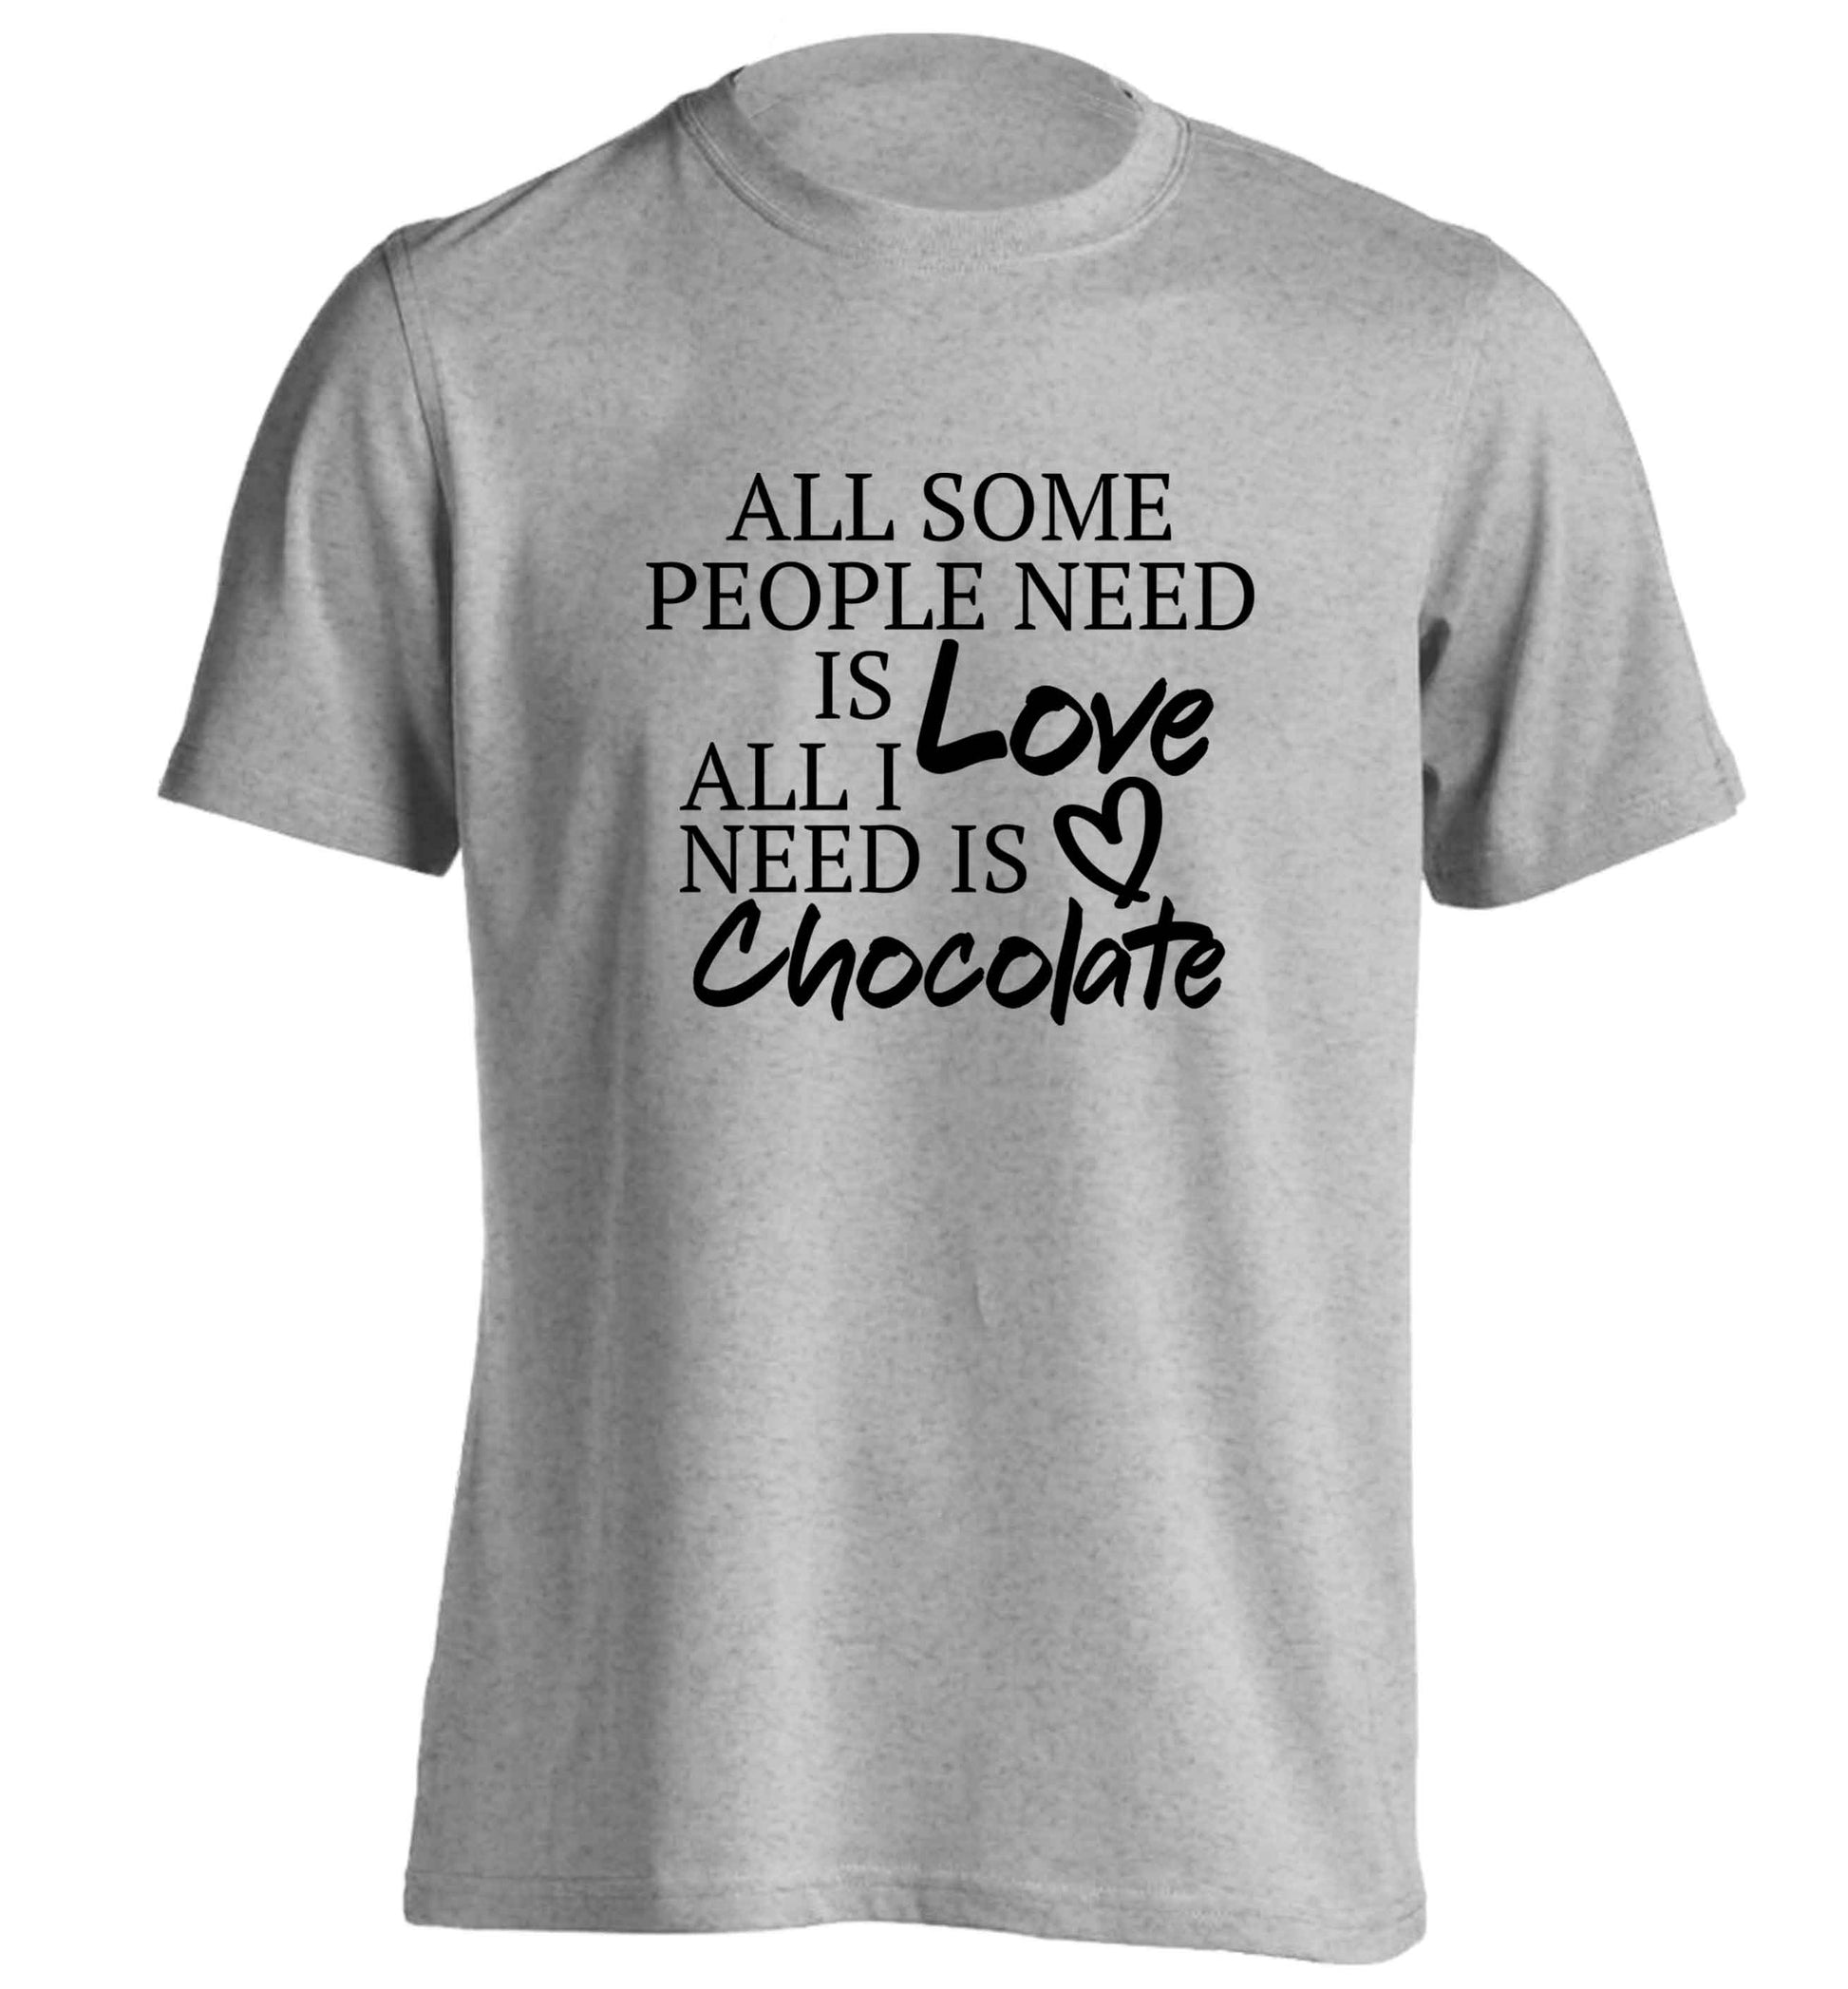 All some people need is love all I need is chocolate adults unisex grey Tshirt 2XL